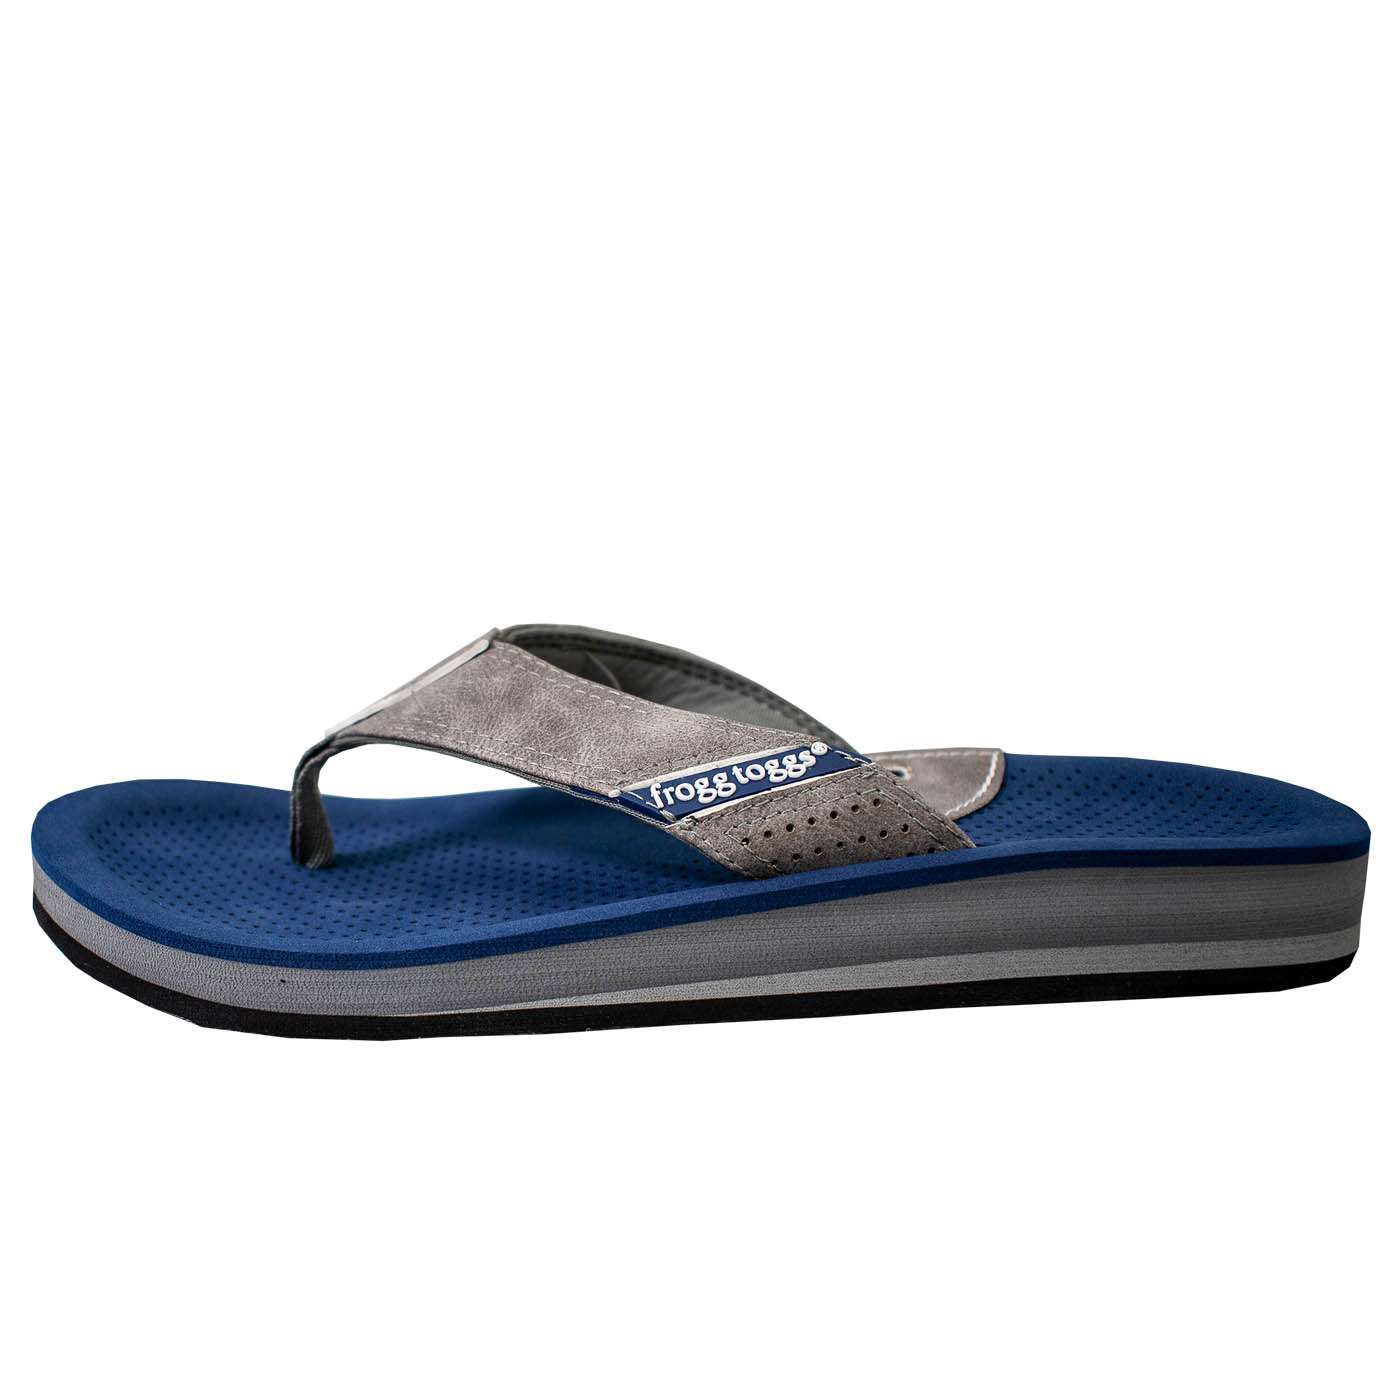 <p><strong>Frogg Toggs Menâs Charter Sandal</strong></p><p>No need to break in these sandals as they are built for comfort from Day 1. Charter Sandals are built with orthopedically designed footbeds for natural comfort. Triple density midsoles give feet a spa like treatment. Soft fabric lines the uppers to make sure your feet are wrapped in 360 degrees of total comfort. $34.99. <a href=